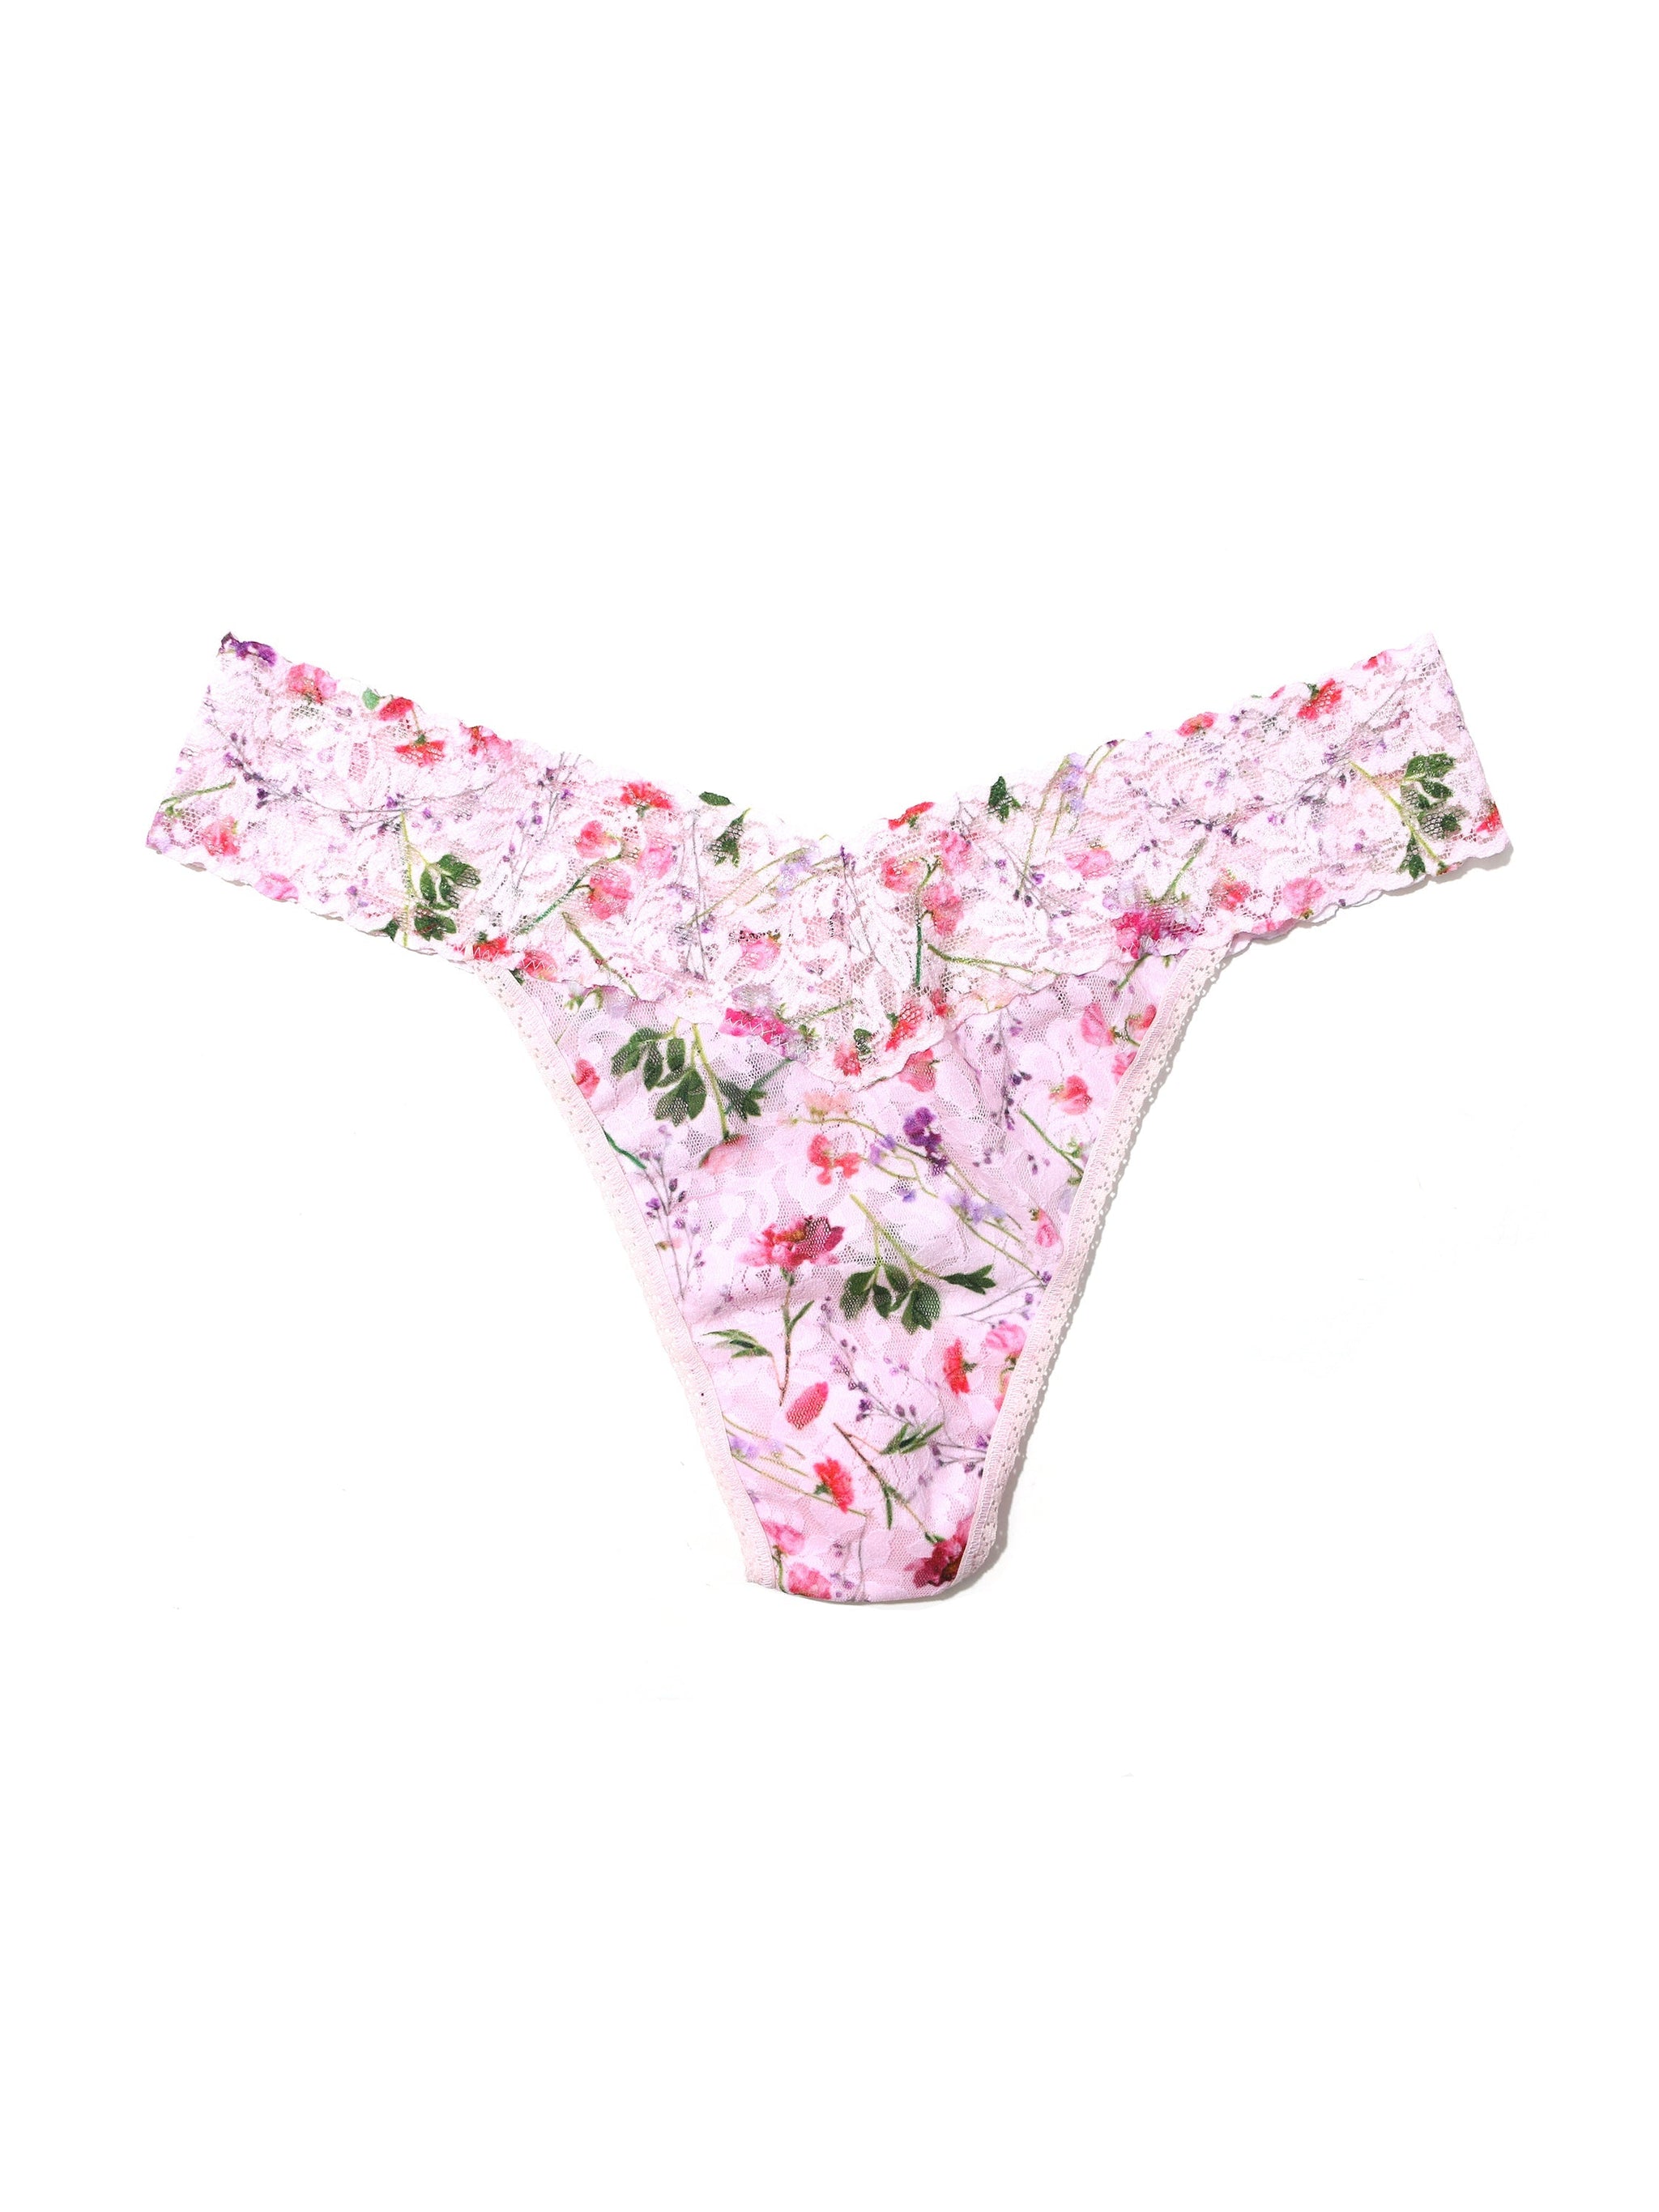 Printed Signature Lace Original Rise Thong Rise And Vines Sale